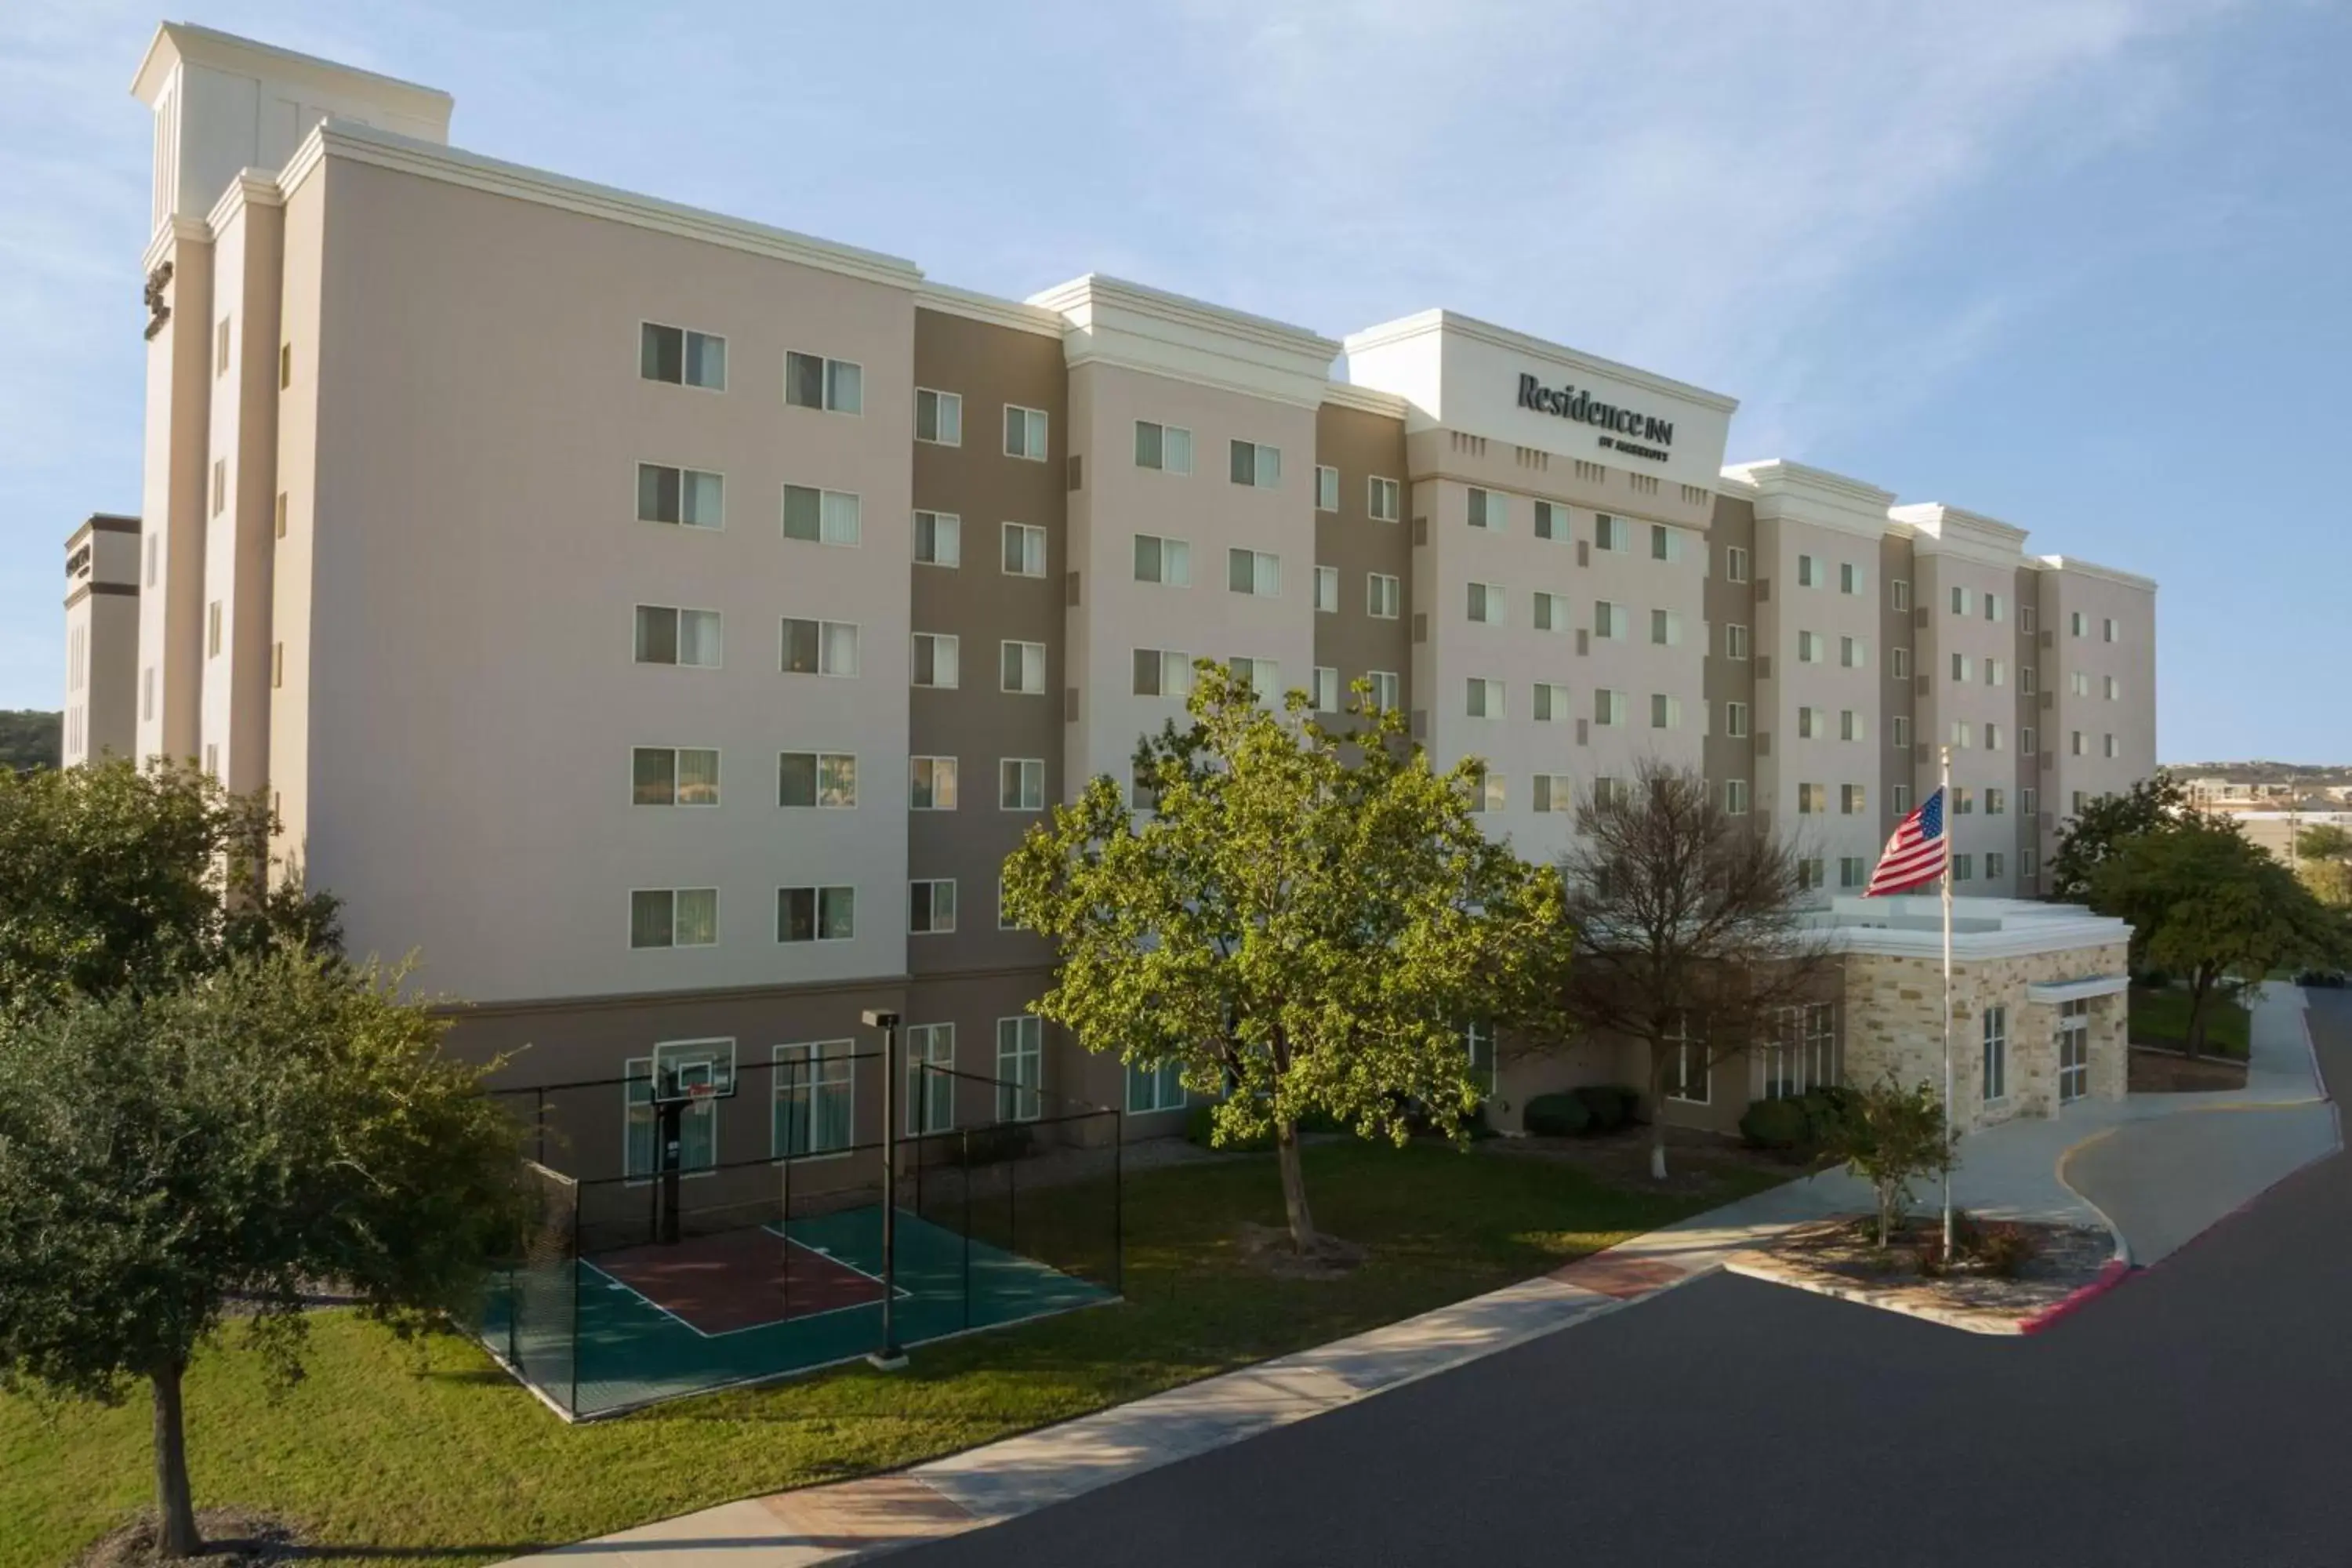 Property Building in Residence Inn by Marriott San Antonio Six Flags at The RIM